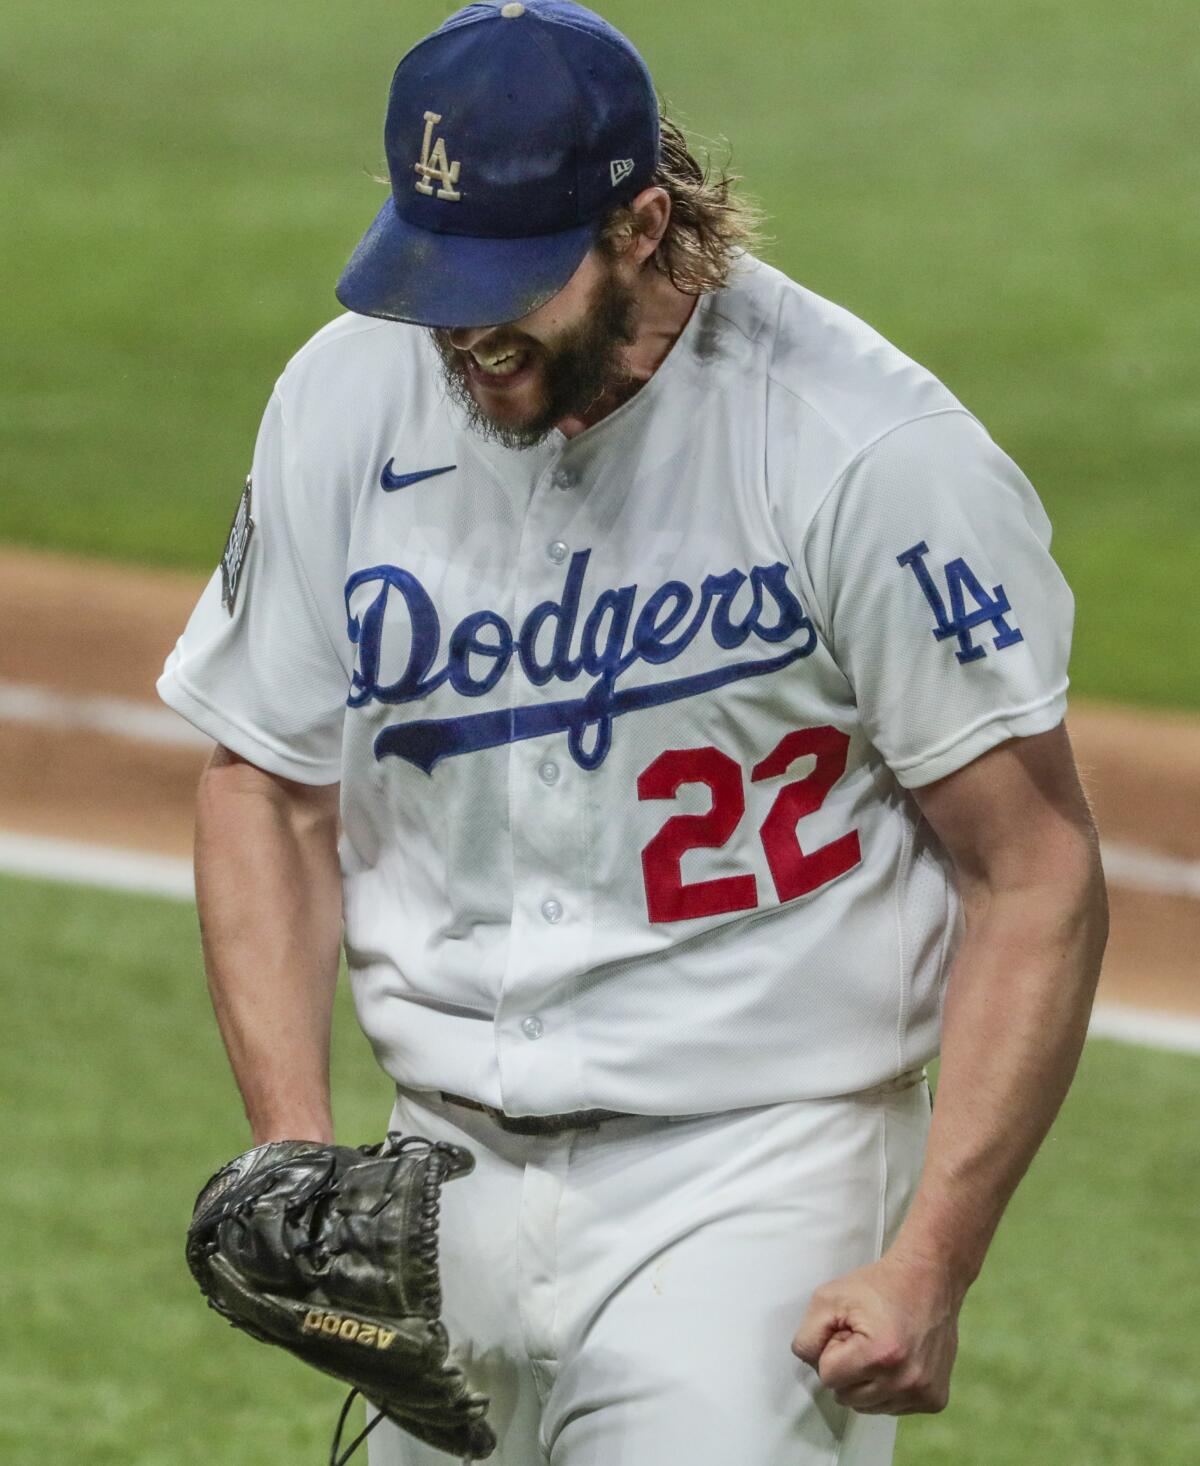 Dodgers starting pitcher Clayton Kershaw yells out in frustration as he heads to the dugout.